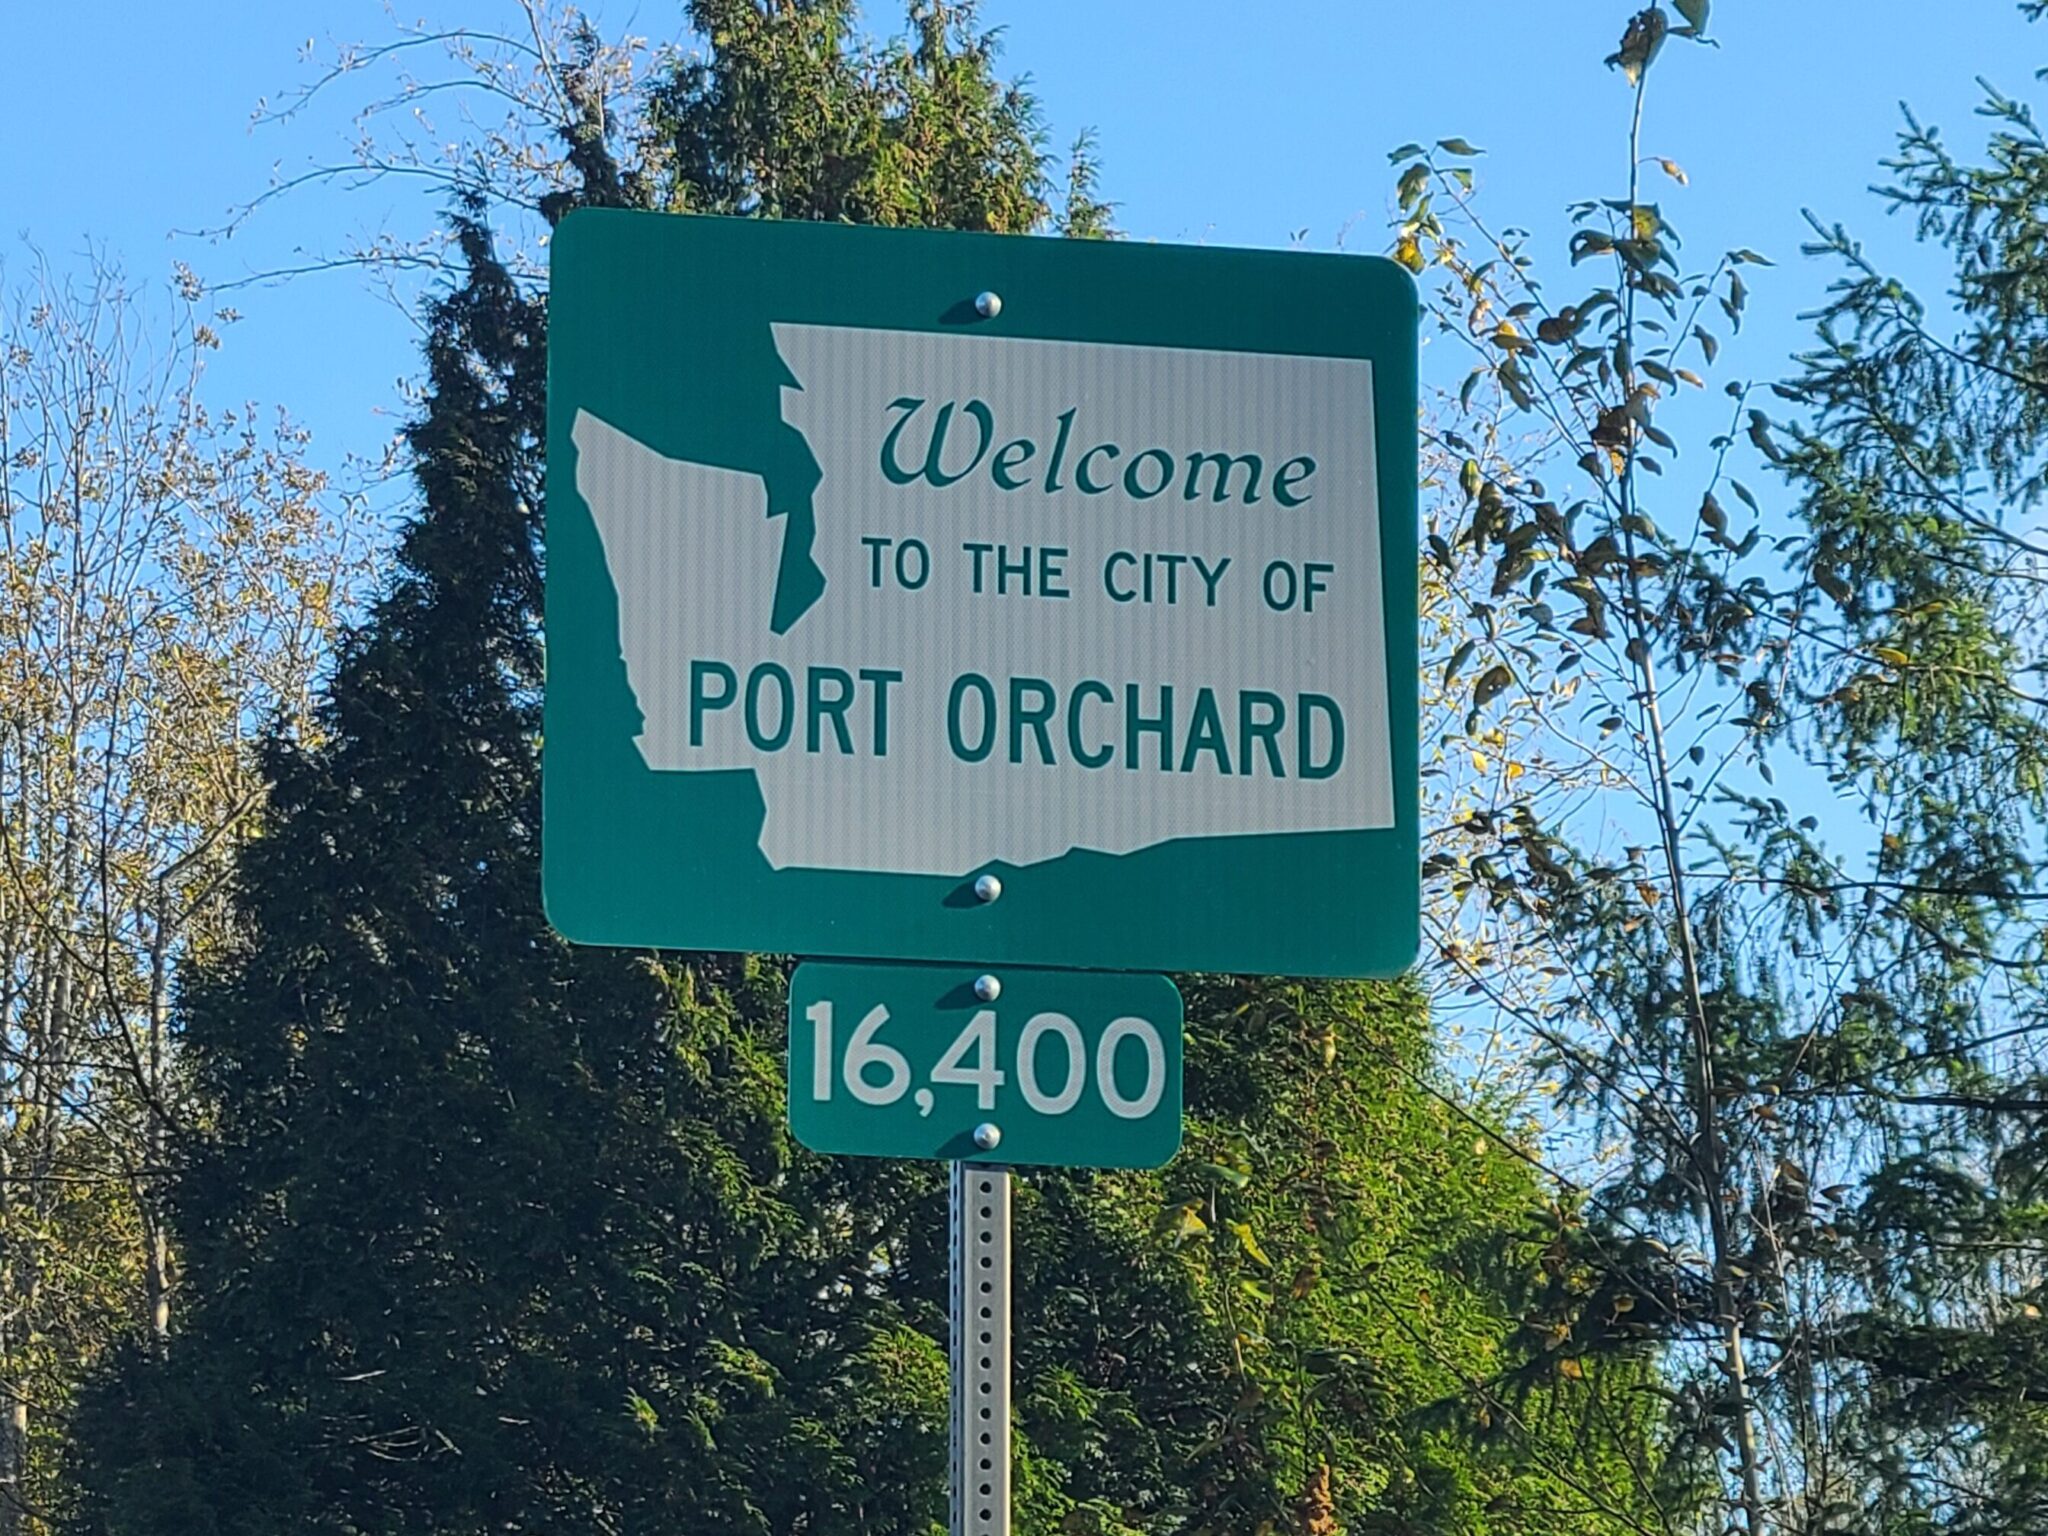 On-the-Ground Investigation in Port Orchard